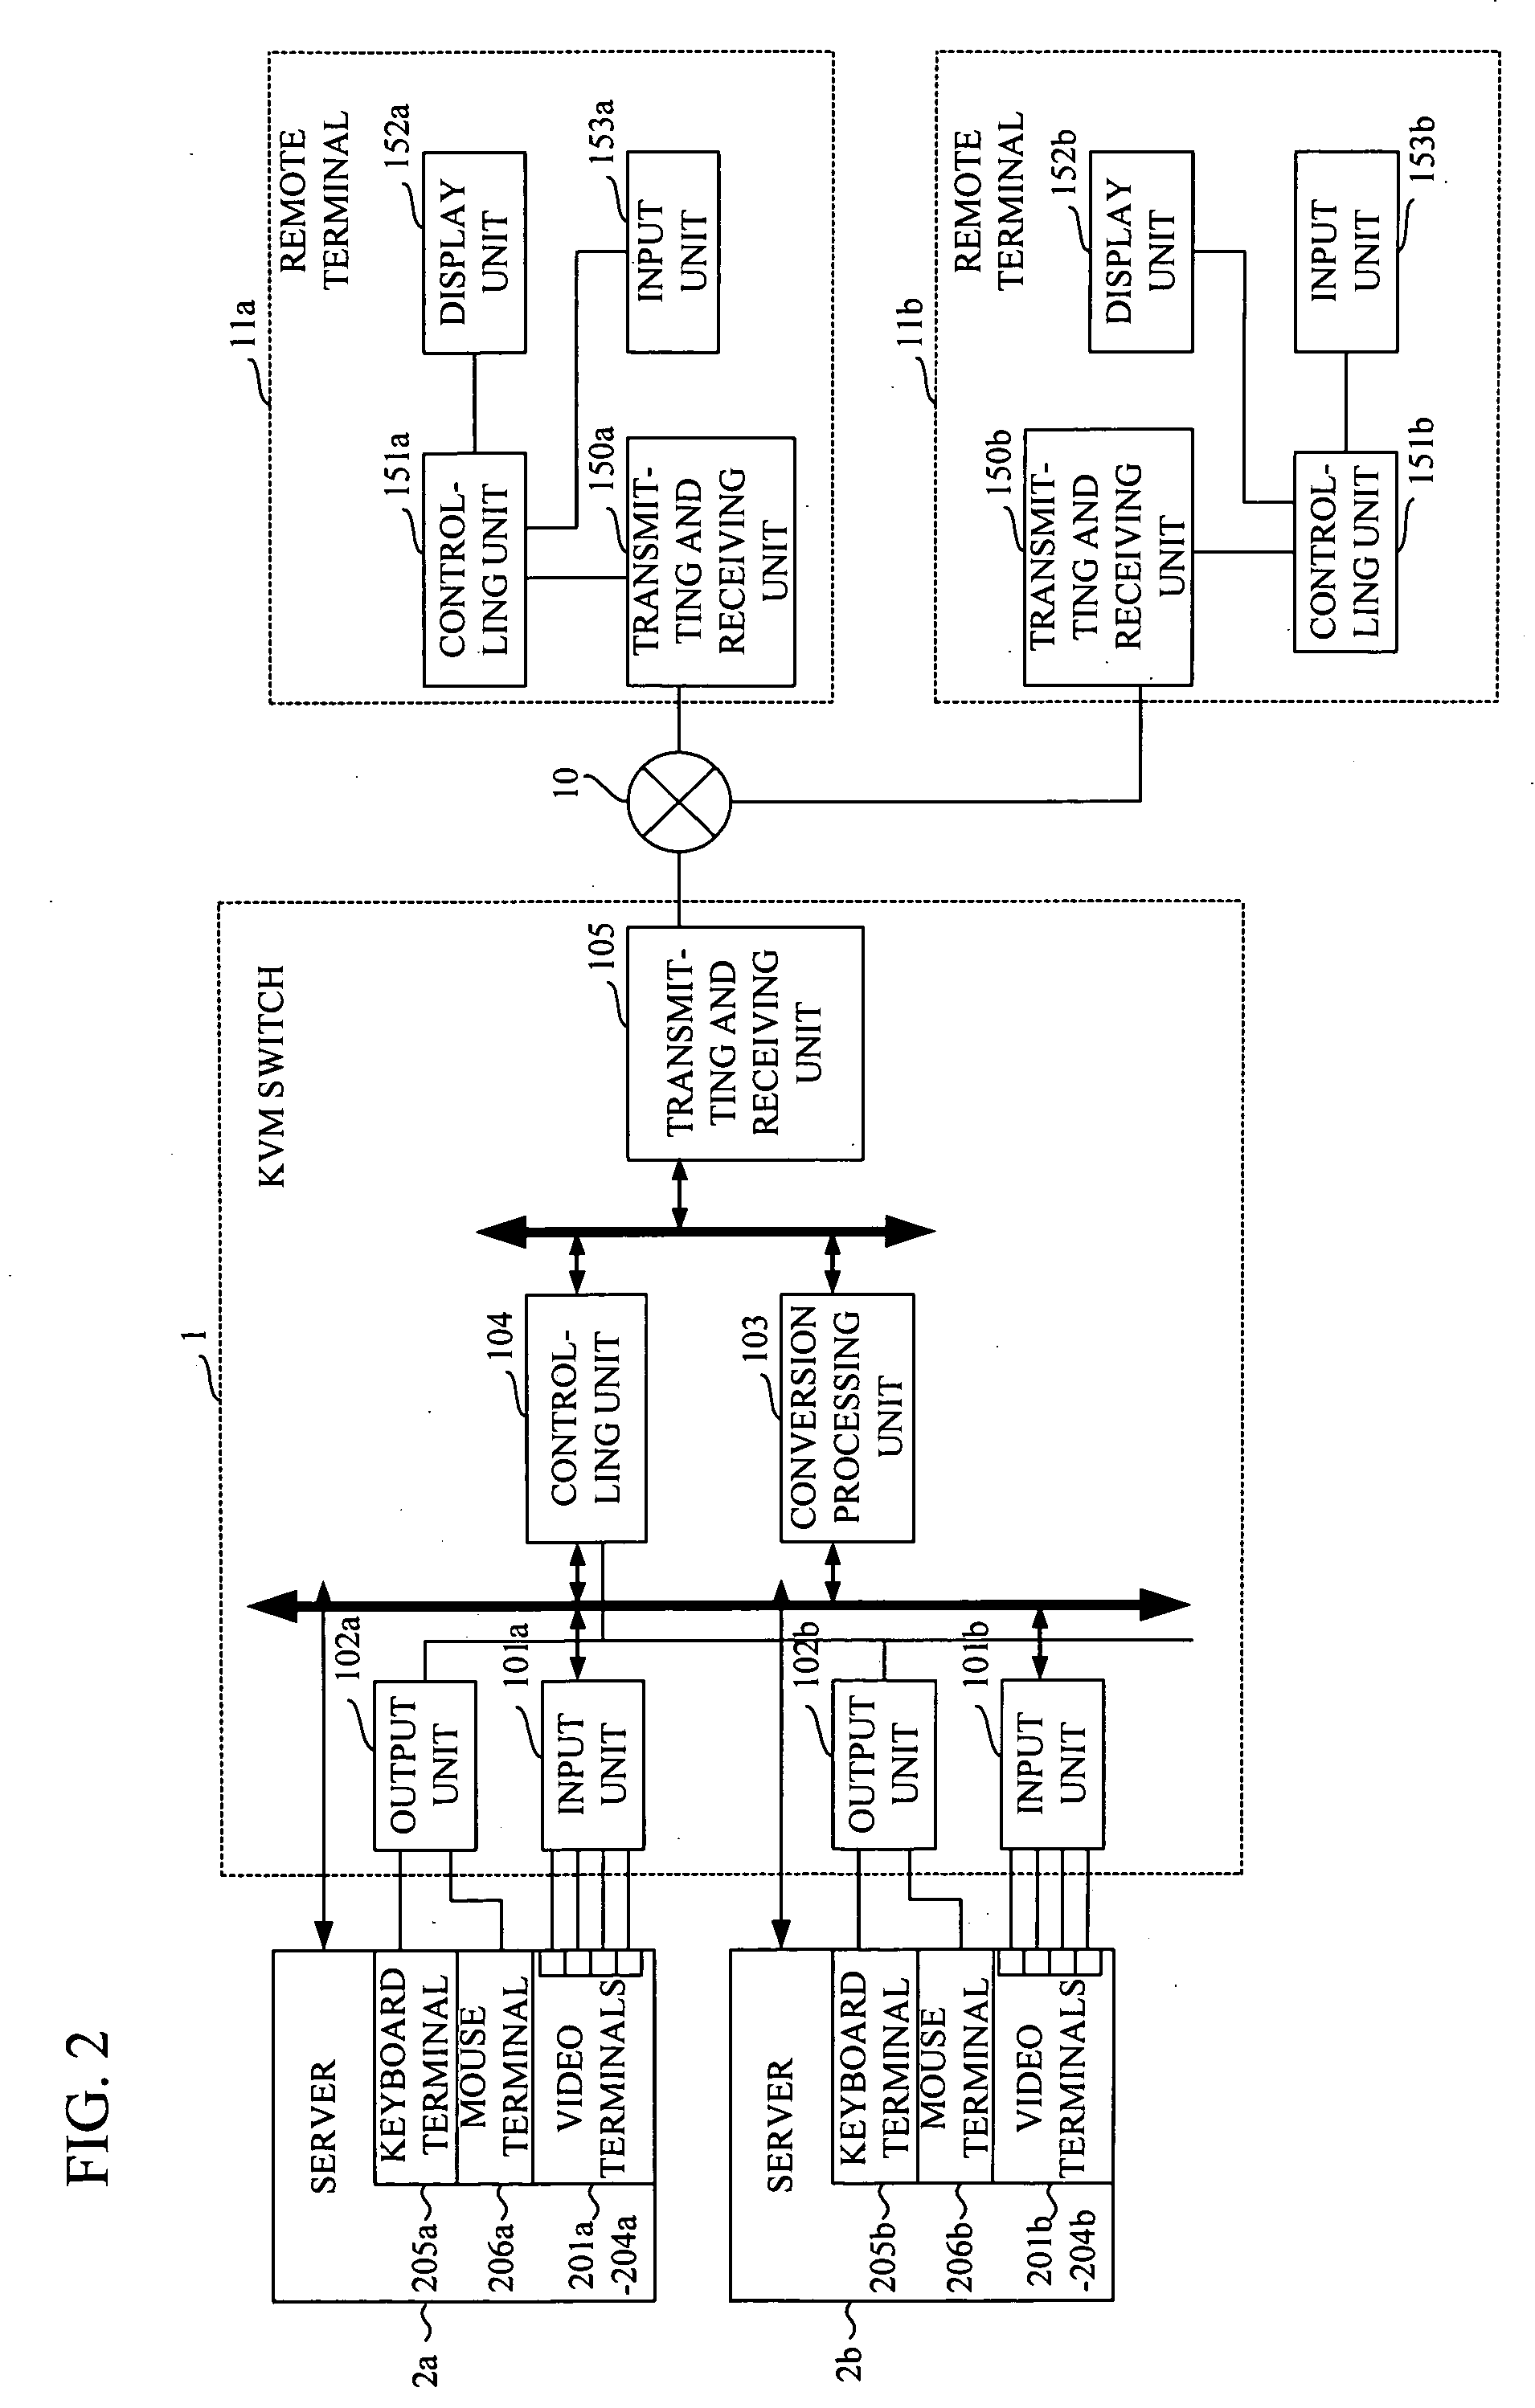 KVM switch, method for controlling the same, switching syestem for multi-monitor, and switching method for multi-monitor